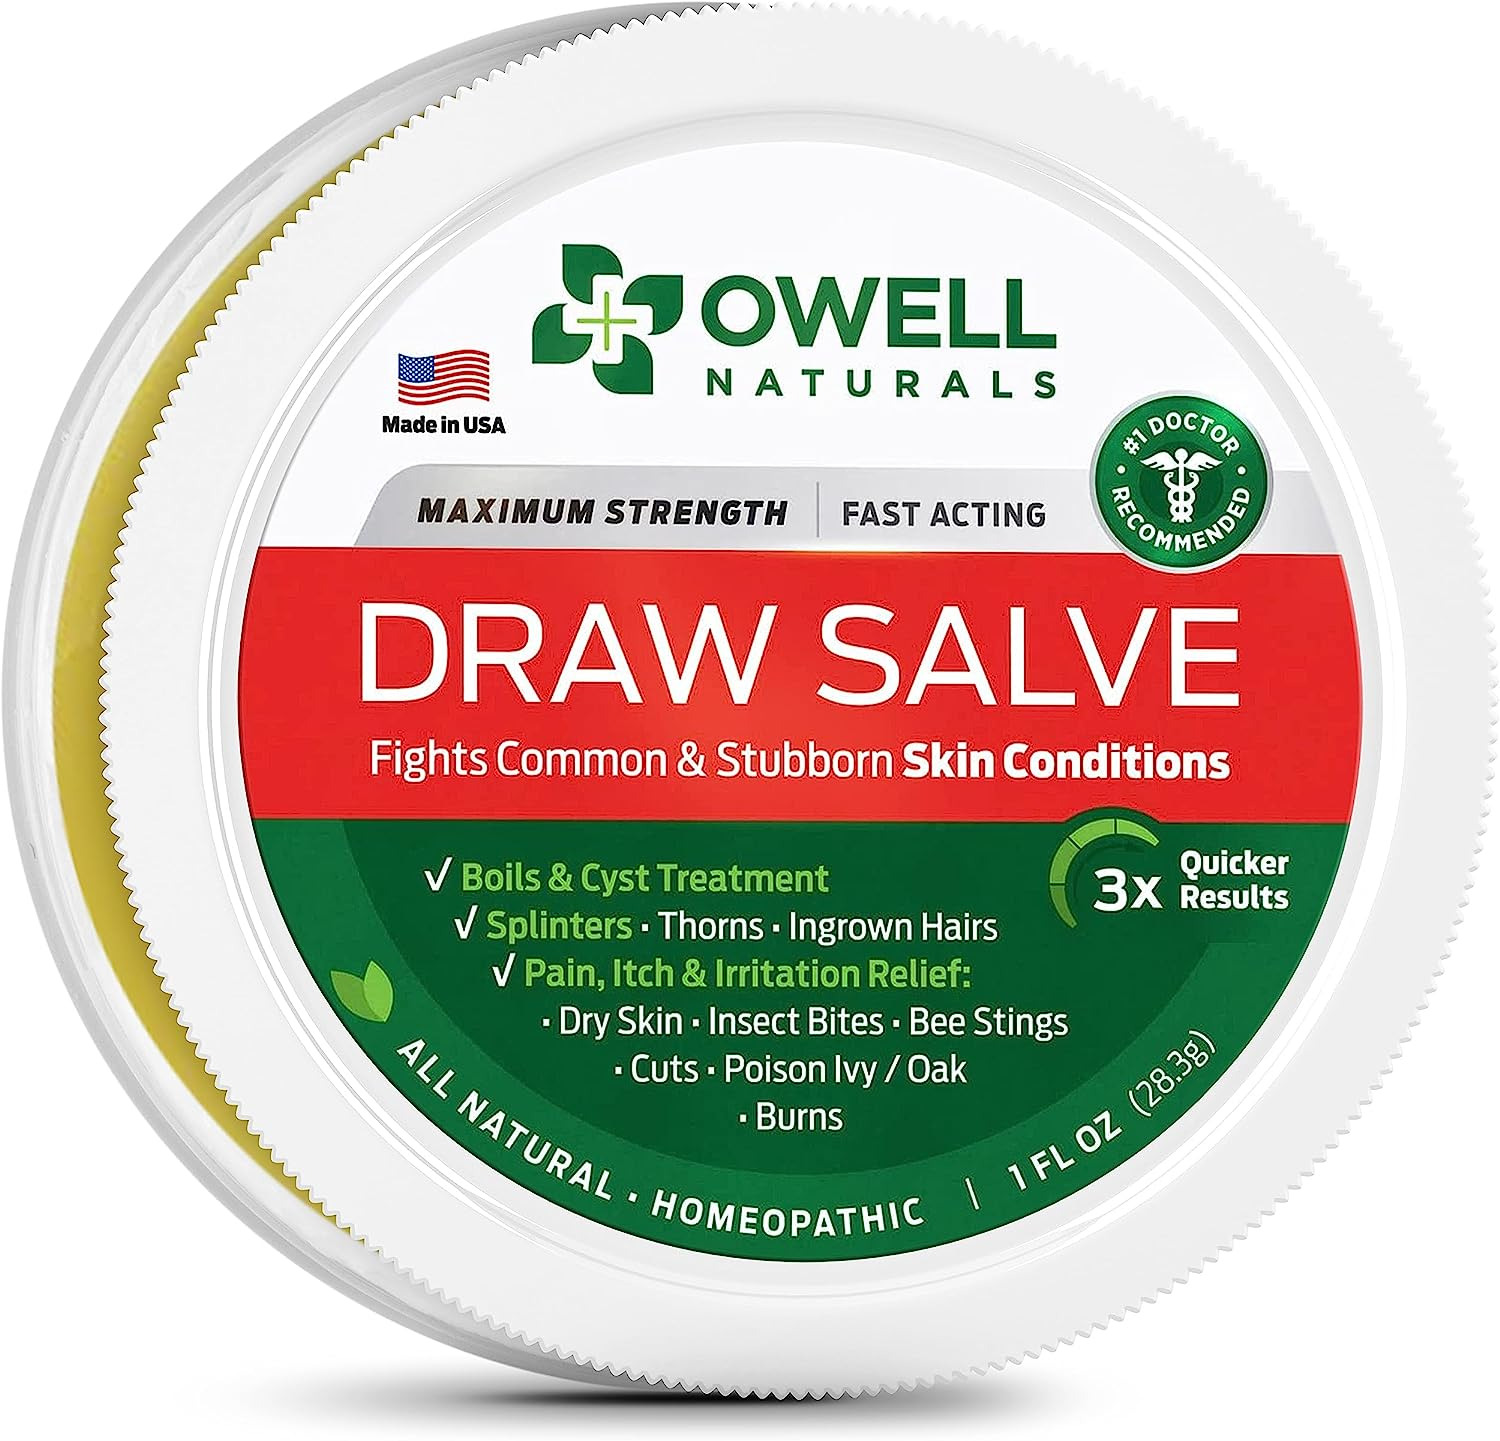 Amish Origins Owell Naturals Drawing Salve Ointment 1Oz, Ingrown Hair Treatment,